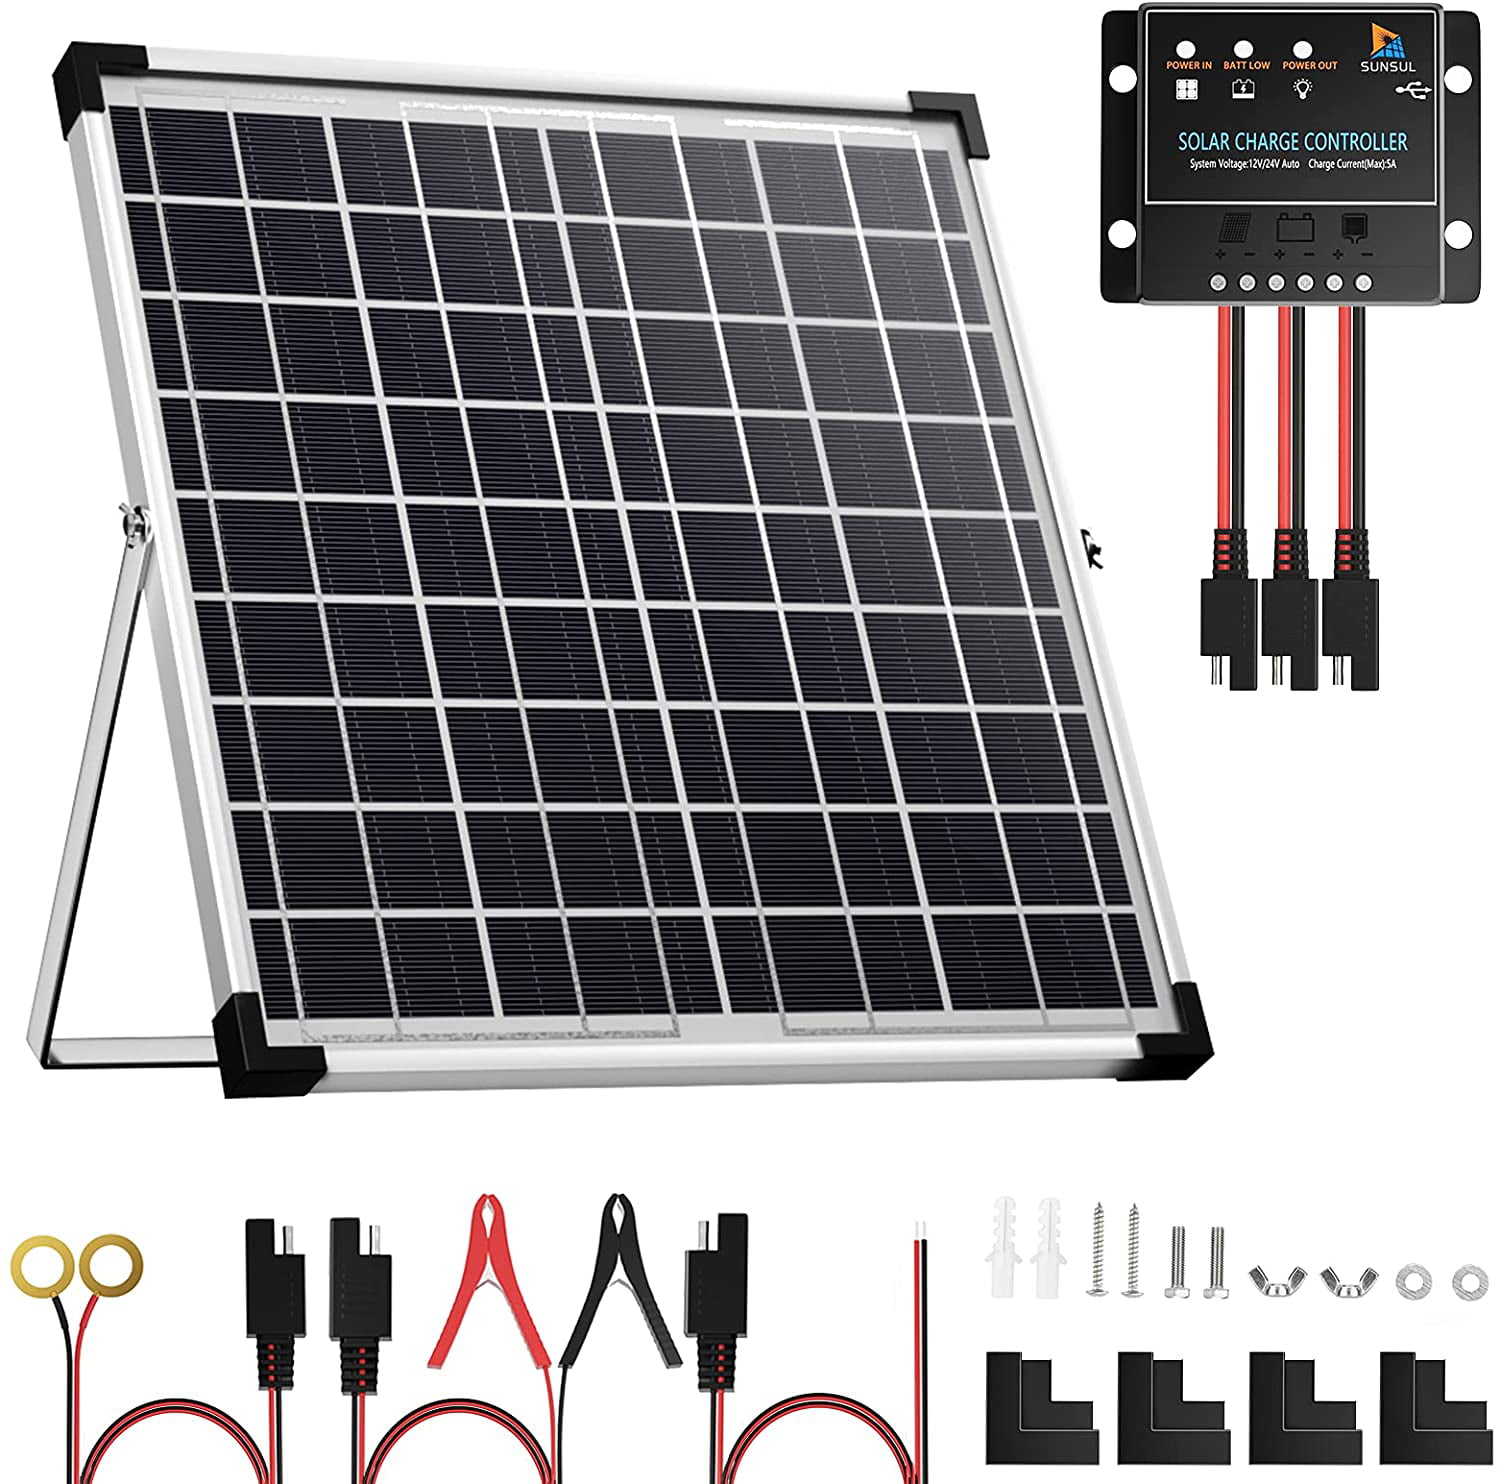 SUNSUL 30 Watt 12V Solar Panel Kit Battery Maintainer Trickle Charger 30 Watt with Accessories with Waterproof 5A 12V/24V PWM Solar Charge Controller and Adjustable Solar Panels Mount Rack Bracket 